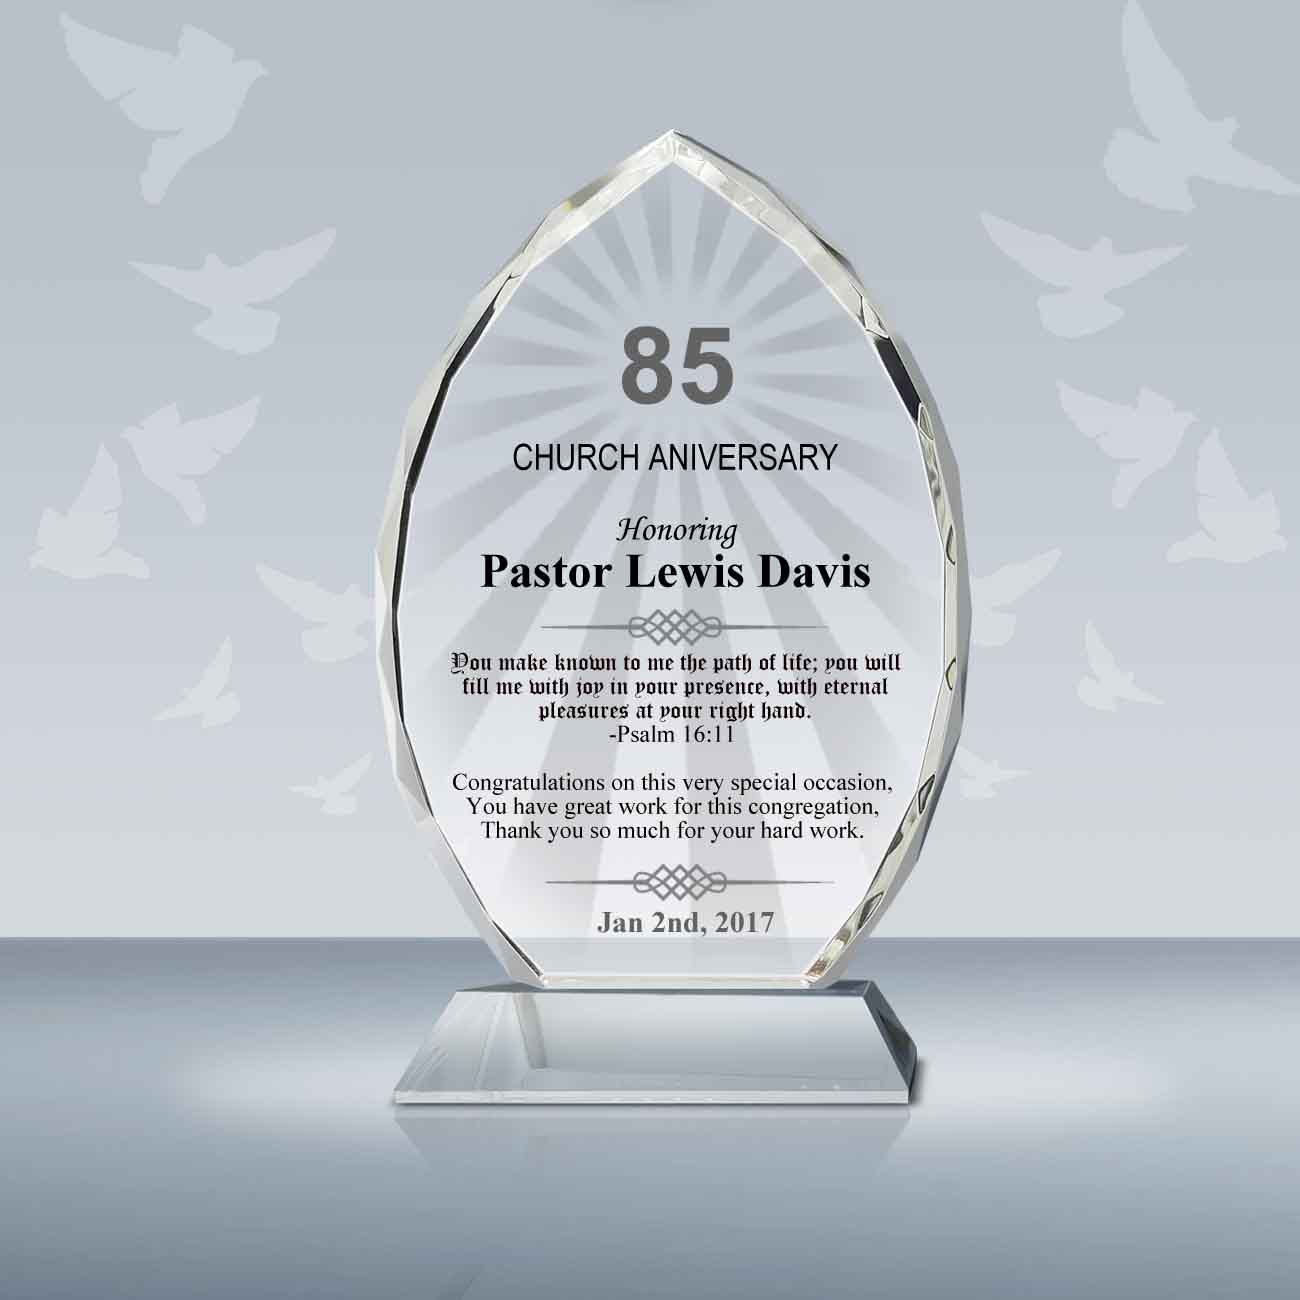 Church & Pastor – Goodcount 3D Crystal Etching Gift & Award